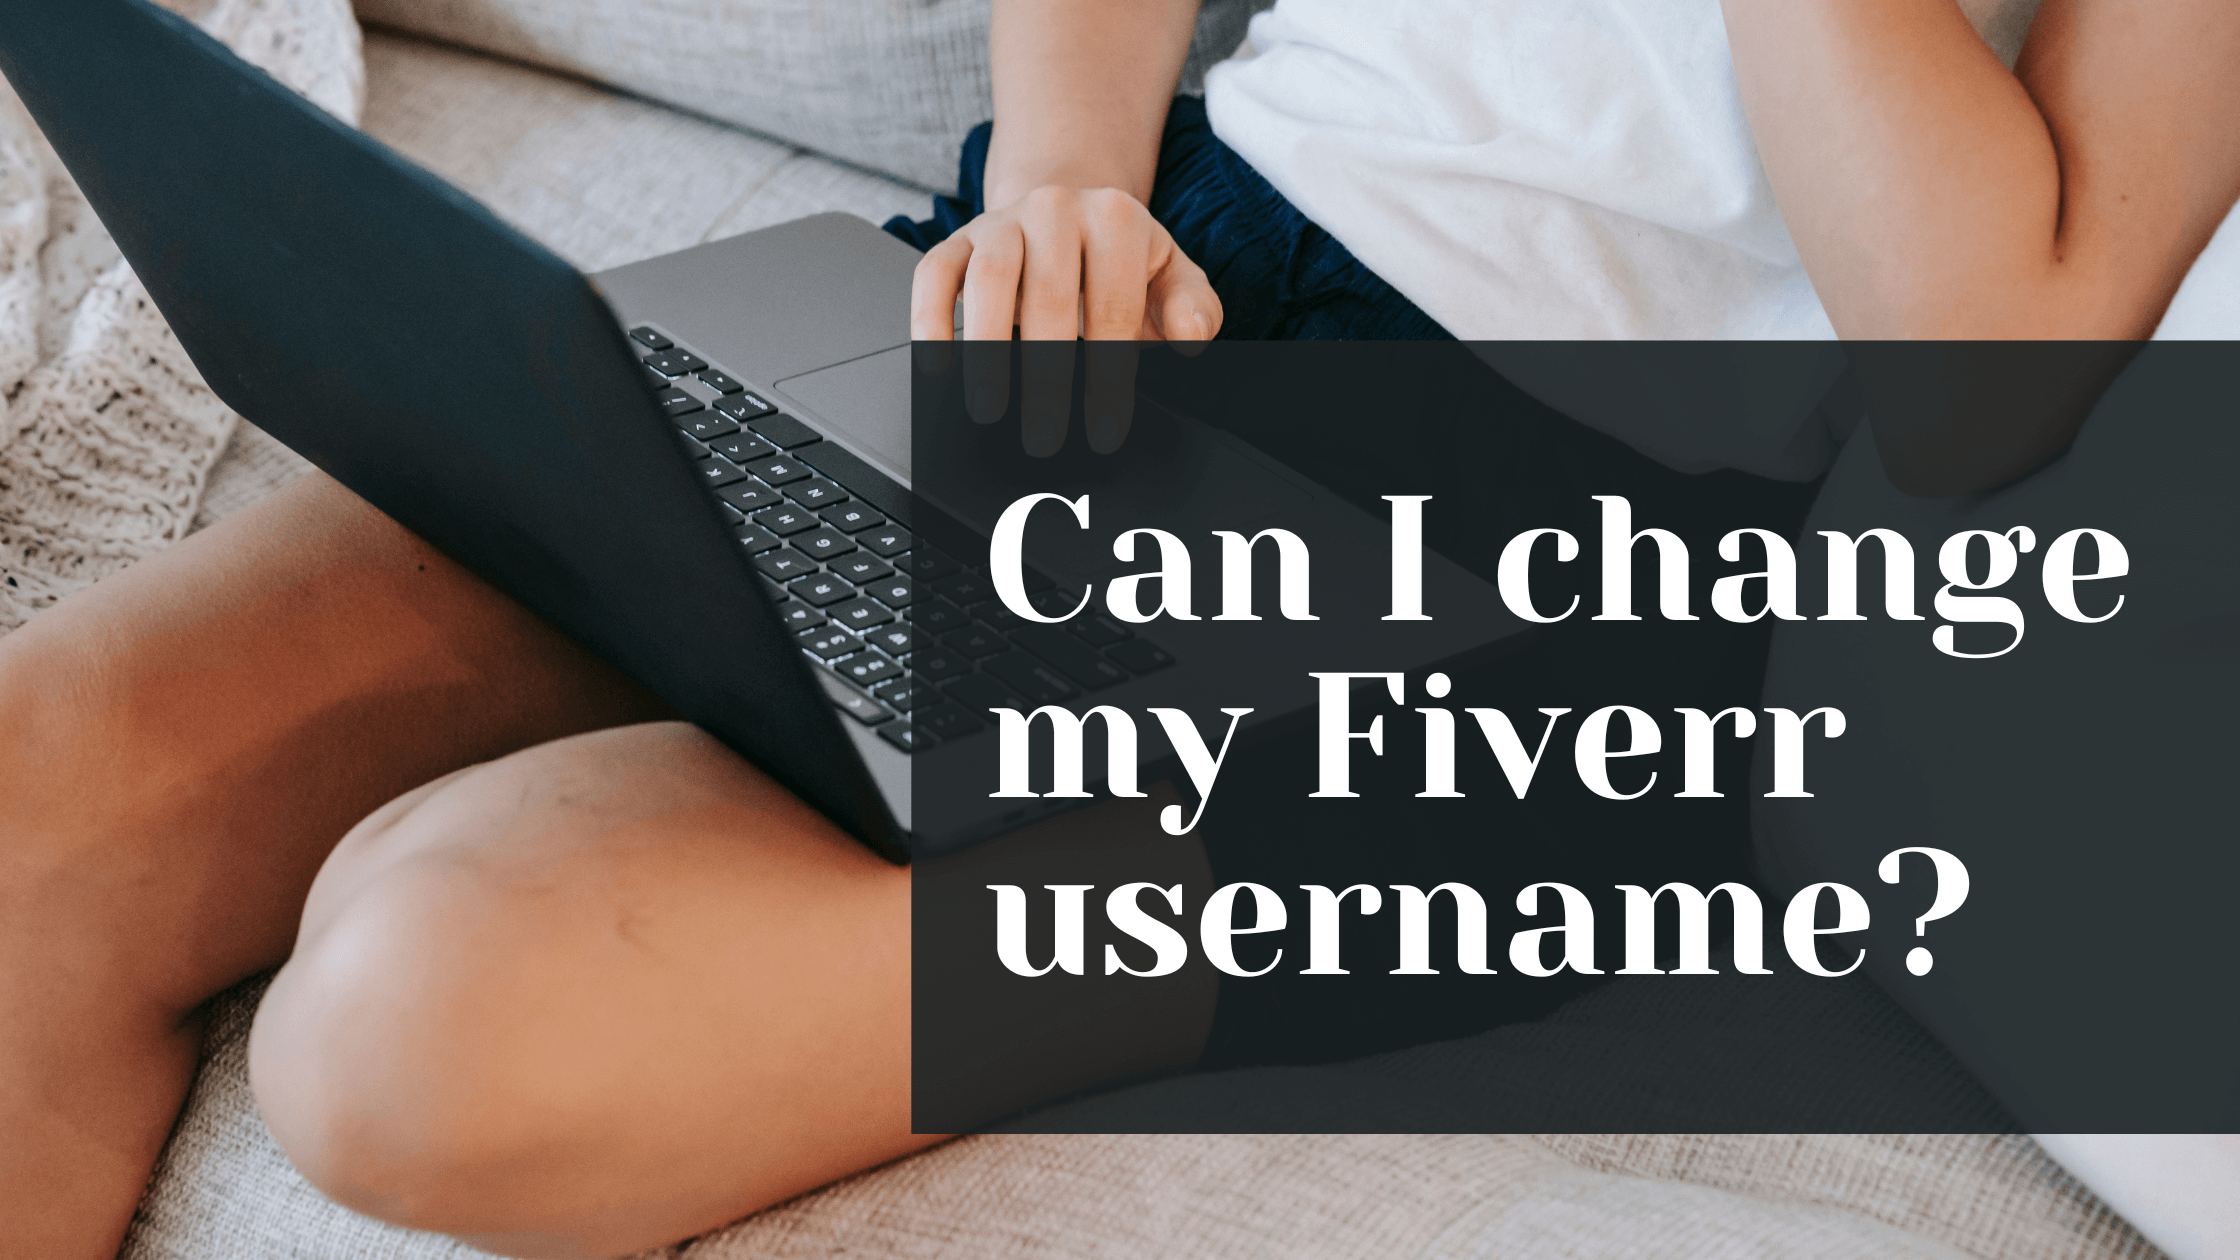 Can I change my Fiverr username